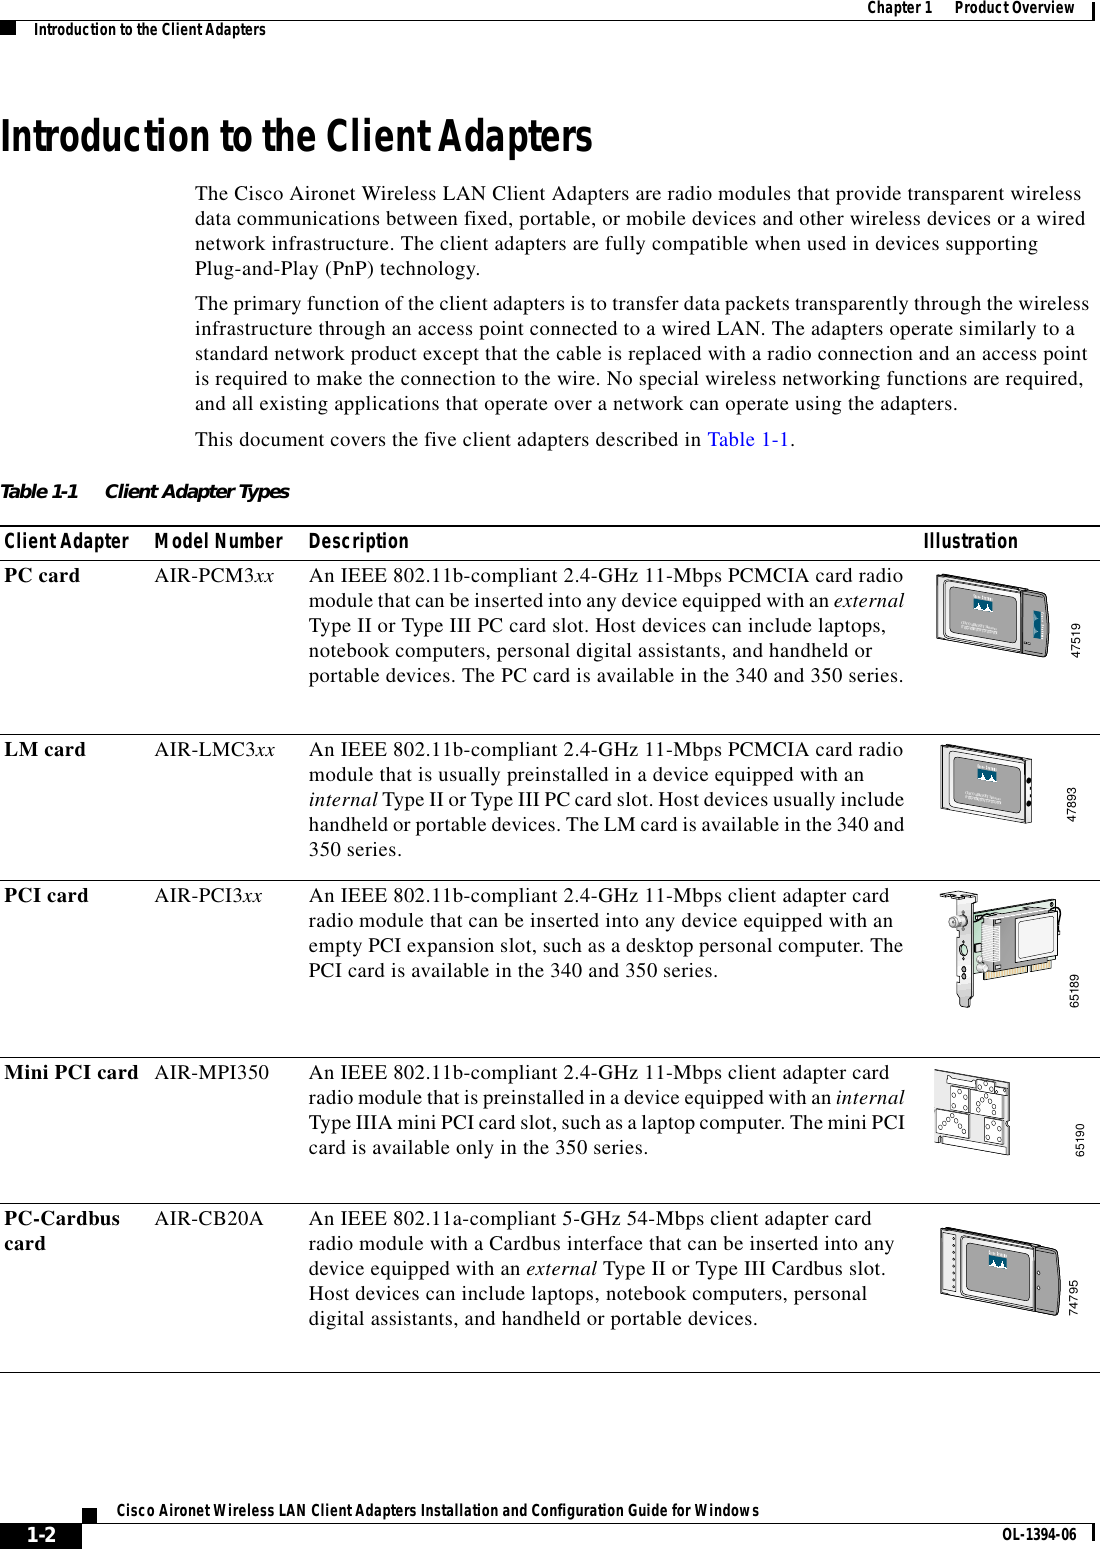 1-2Cisco Aironet Wireless LAN Client Adapters Installation and Configuration Guide for Windows OL-1394-06Chapter 1      Product OverviewIntroduction to the Client AdaptersIntroduction to the Client AdaptersThe Cisco Aironet Wireless LAN Client Adapters are radio modules that provide transparent wireless data communications between fixed, portable, or mobile devices and other wireless devices or a wired network infrastructure. The client adapters are fully compatible when used in devices supporting Plug-and-Play (PnP) technology.The primary function of the client adapters is to transfer data packets transparently through the wireless infrastructure through an access point connected to a wired LAN. The adapters operate similarly to a standard network product except that the cable is replaced with a radio connection and an access point is required to make the connection to the wire. No special wireless networking functions are required, and all existing applications that operate over a network can operate using the adapters.This document covers the five client adapters described in Table 1-1.Table 1-1 Client Adapter TypesClient Adapter Model Number Description IllustrationPC card AIR-PCM3xx An IEEE 802.11b-compliant 2.4-GHz 11-Mbps PCMCIA card radio module that can be inserted into any device equipped with an externalType II or Type III PC card slot. Host devices can include laptops, notebook computers, personal digital assistants, and handheld or portable devices. The PC card is available in the 340 and 350 series.LM card AIR-LMC3xx An IEEE 802.11b-compliant 2.4-GHz 11-Mbps PCMCIA card radio module that is usually preinstalled in a device equipped with an internal Type II or Type III PC card slot. Host devices usually include handheld or portable devices. The LM card is available in the 340 and 350 series.PCI card AIR-PCI3xx An IEEE 802.11b-compliant 2.4-GHz 11-Mbps client adapter card radio module that can be inserted into any device equipped with an empty PCI expansion slot, such as a desktop personal computer. The PCI card is available in the 340 and 350 series.Mini PCI card AIR-MPI350 An IEEE 802.11b-compliant 2.4-GHz 11-Mbps client adapter card radio module that is preinstalled in a device equipped with an internalType IIIA mini PCI card slot, such as a laptop computer. The mini PCI card is available only in the 350 series.PC-Cardbus card AIR-CB20A An IEEE 802.11a-compliant 5-GHz 54-Mbps client adapter card radio module with a Cardbus interface that can be inserted into any device equipped with an external Type II or Type III Cardbus slot. Host devices can include laptops, notebook computers, personal digital assistants, and handheld or portable devices.CISCO AIRONET 340 SERIES11 Mbps WIRELESS LAN ADAPTER47519CISCO AIRONET 340 SERIES11 Mbps WIRELESS LAN ADAPTER47893651896519074795